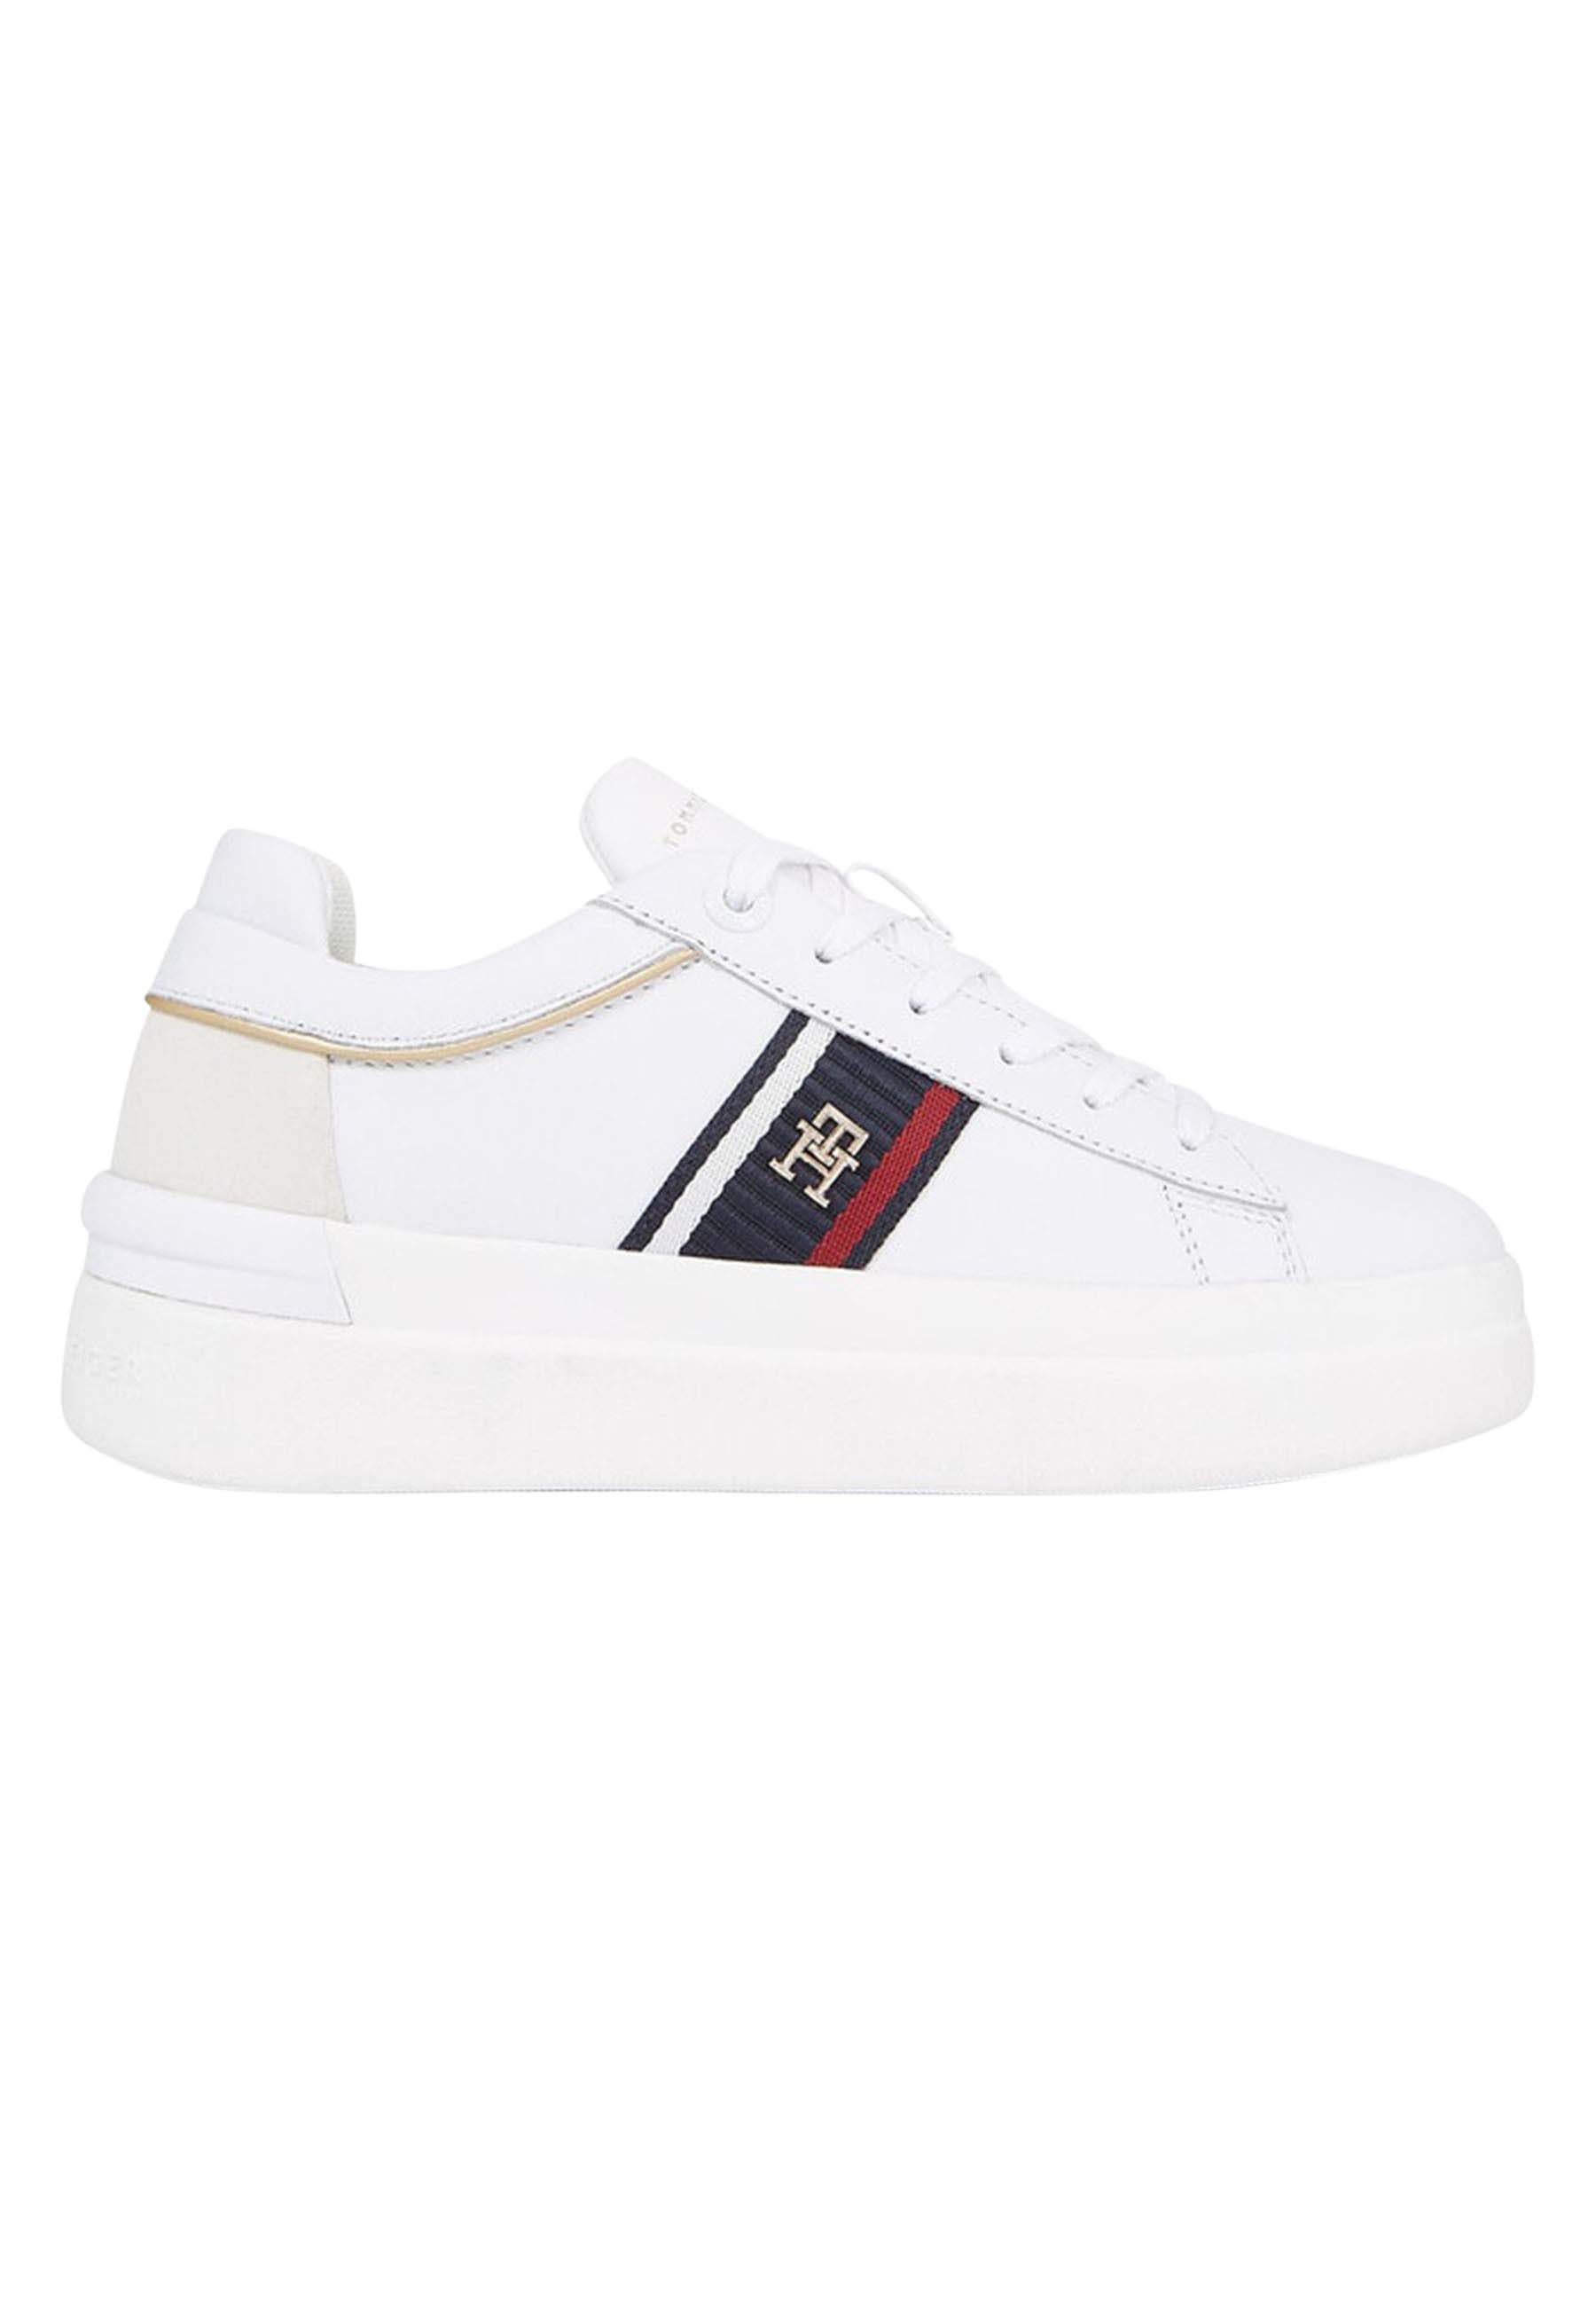 Tommy Hilfiger sneakers wit Dames maat 37